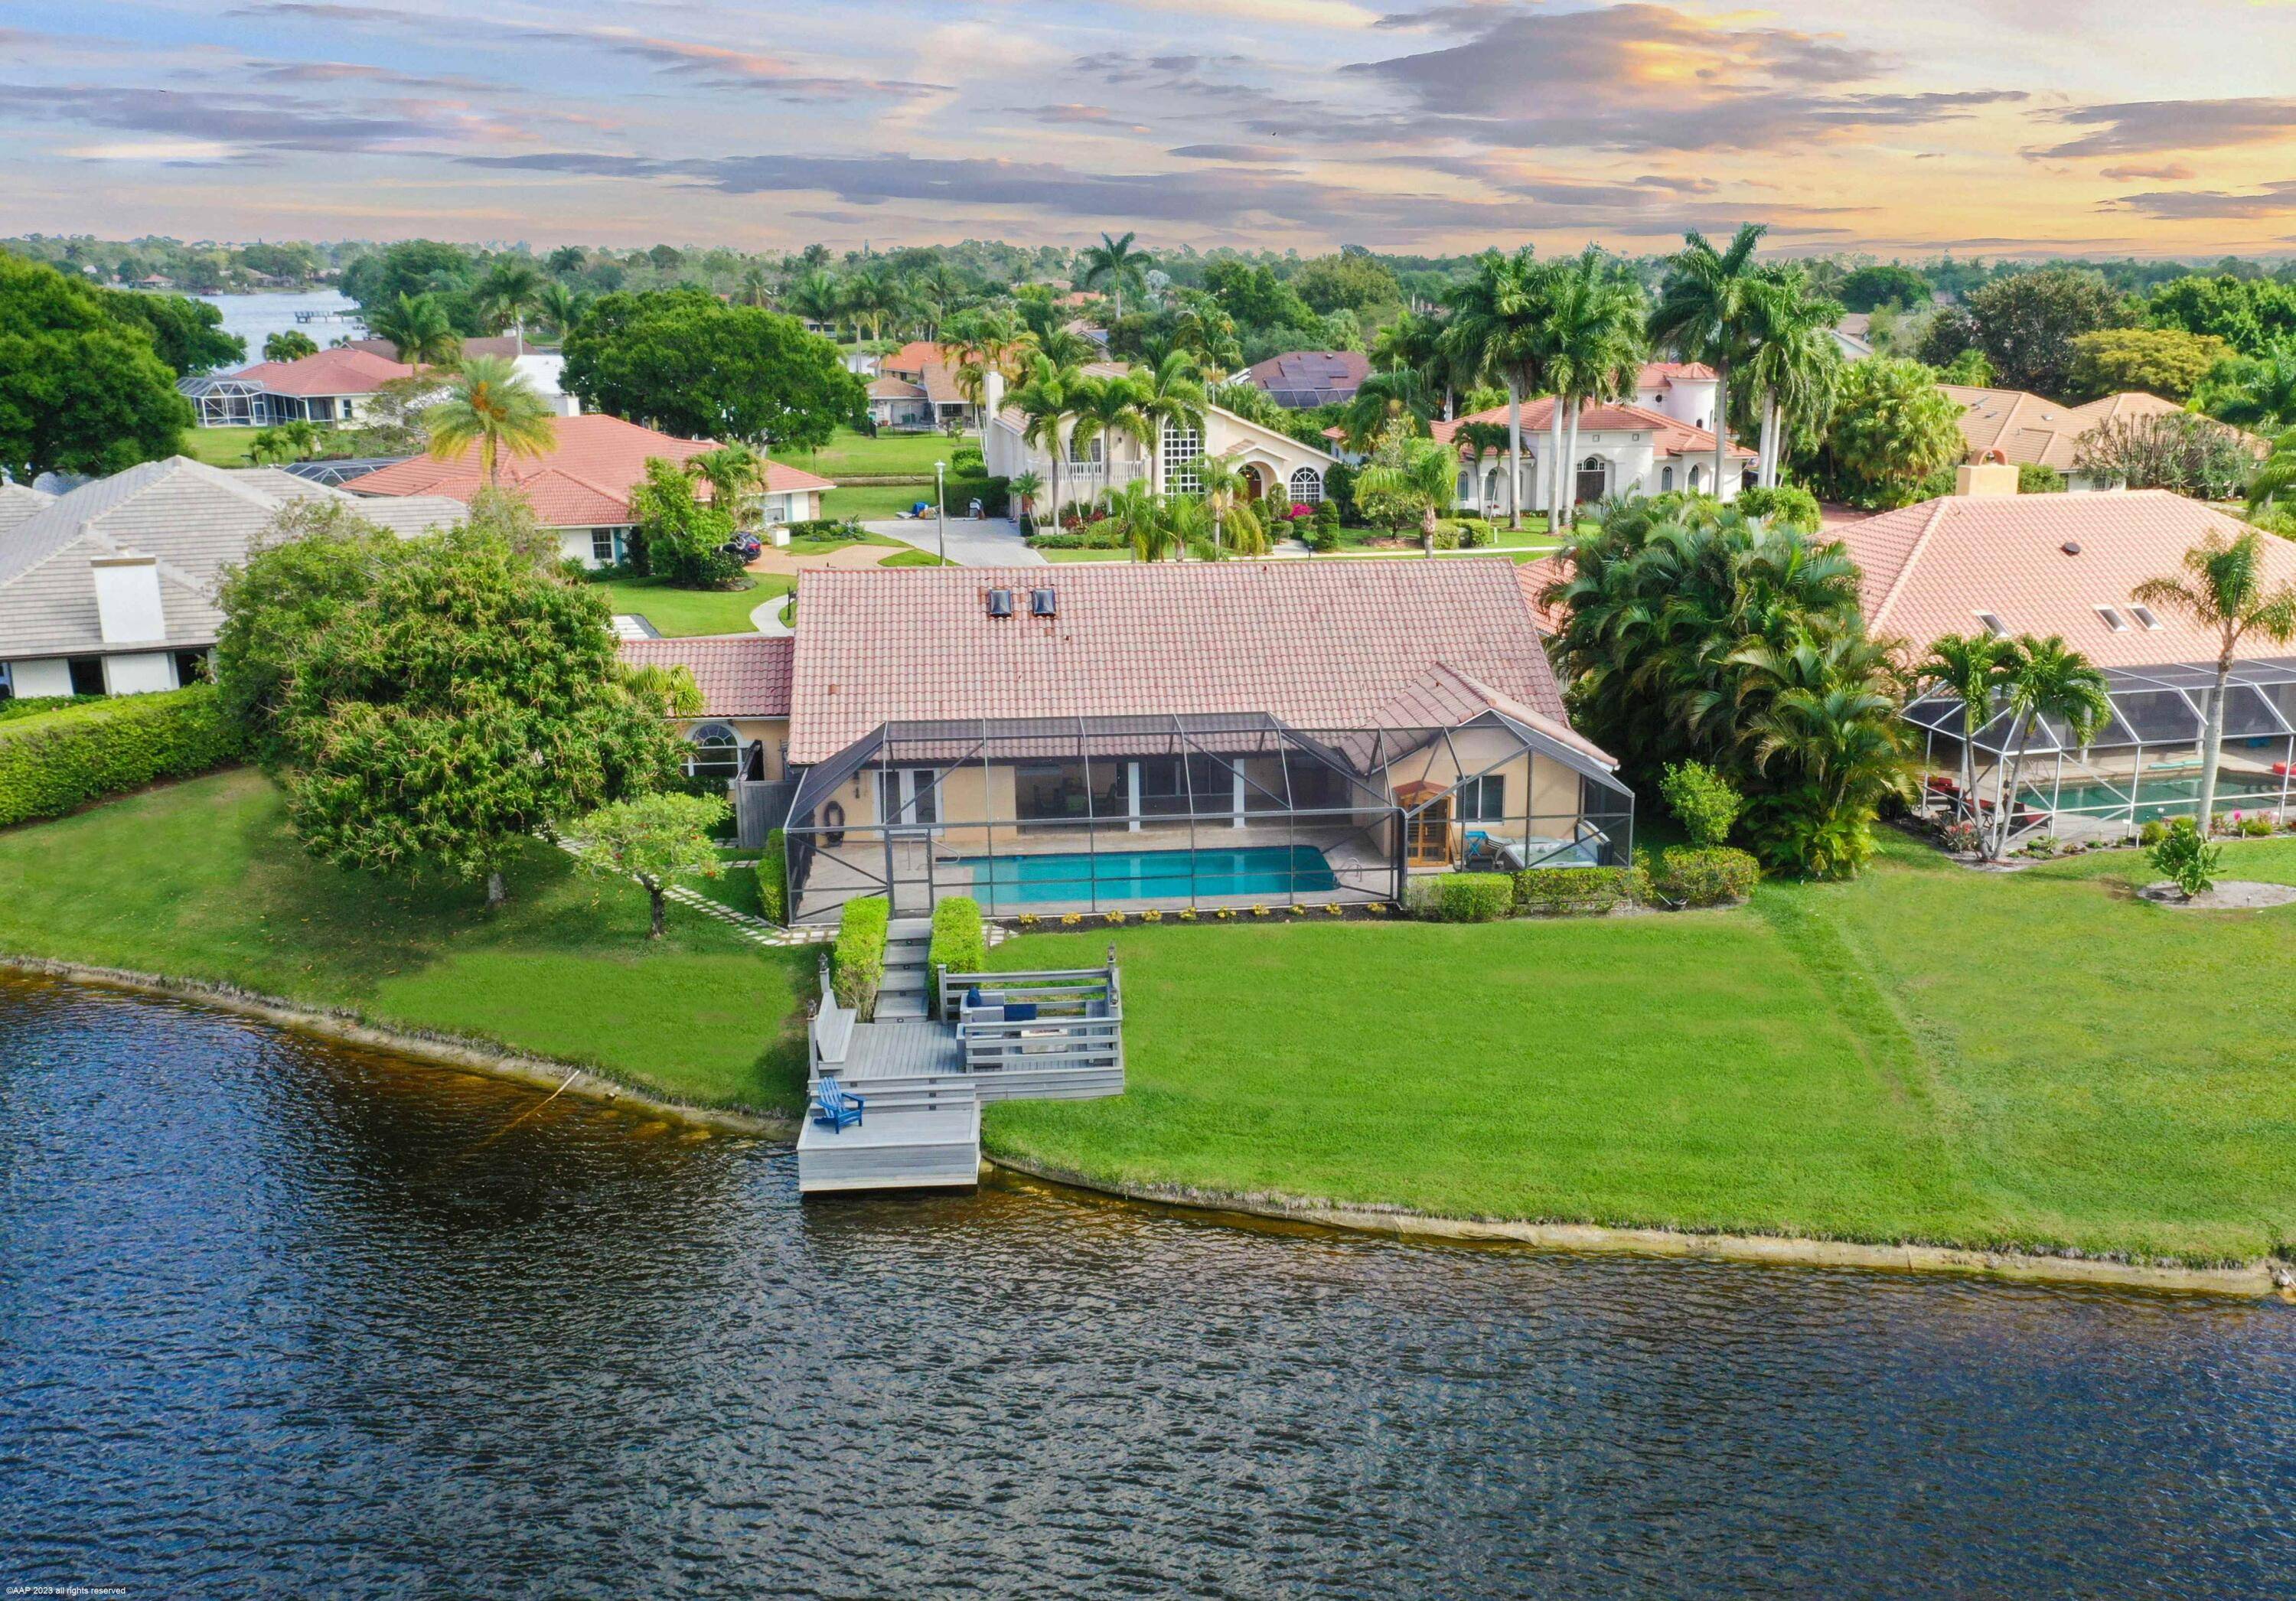 This incredible lakefront property is located in the gated community of Polo West Estates, just minutes away from the horse show venues, shopping and dining.